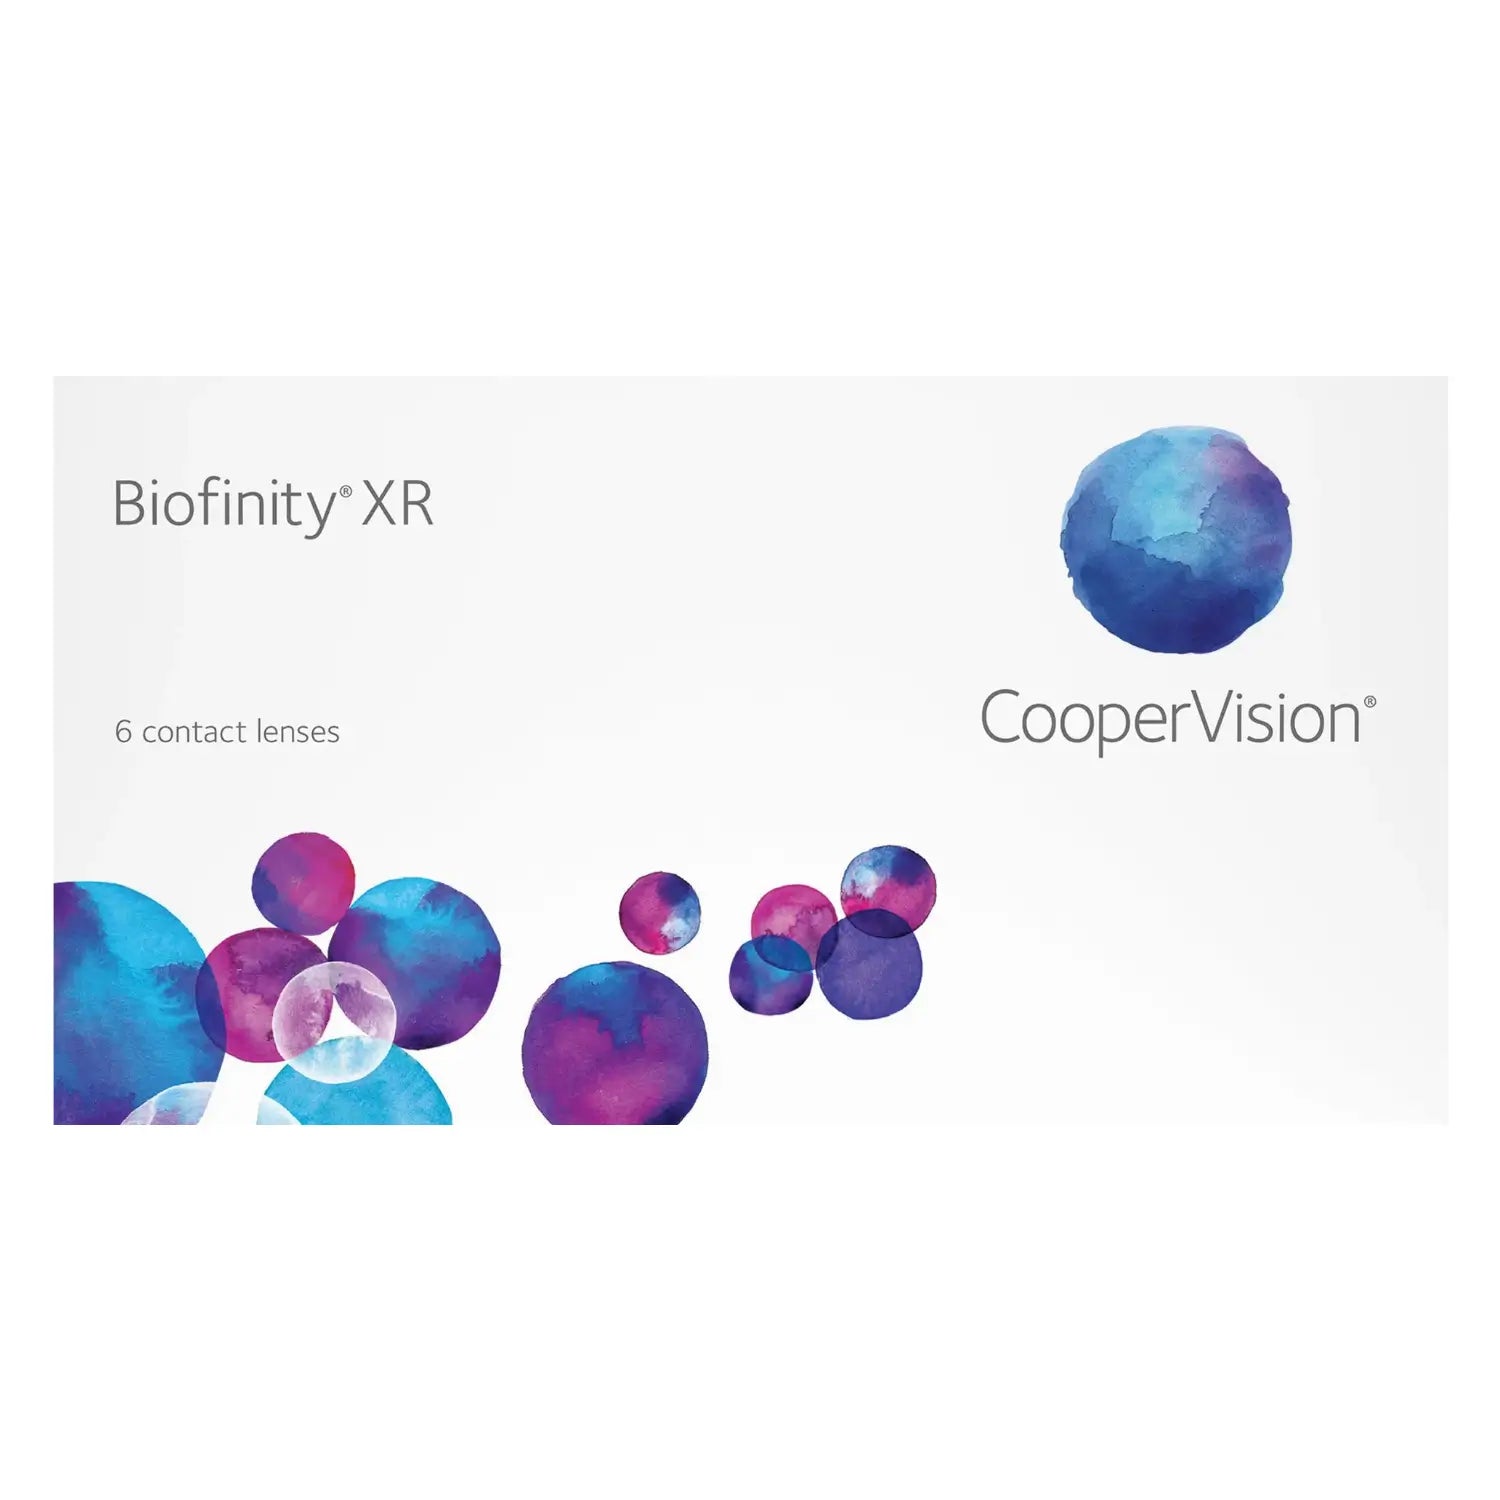 Certified Biofinity XR monthly Contact Lenses by Cooper Vision on sale online at The Optical Co at the best prices